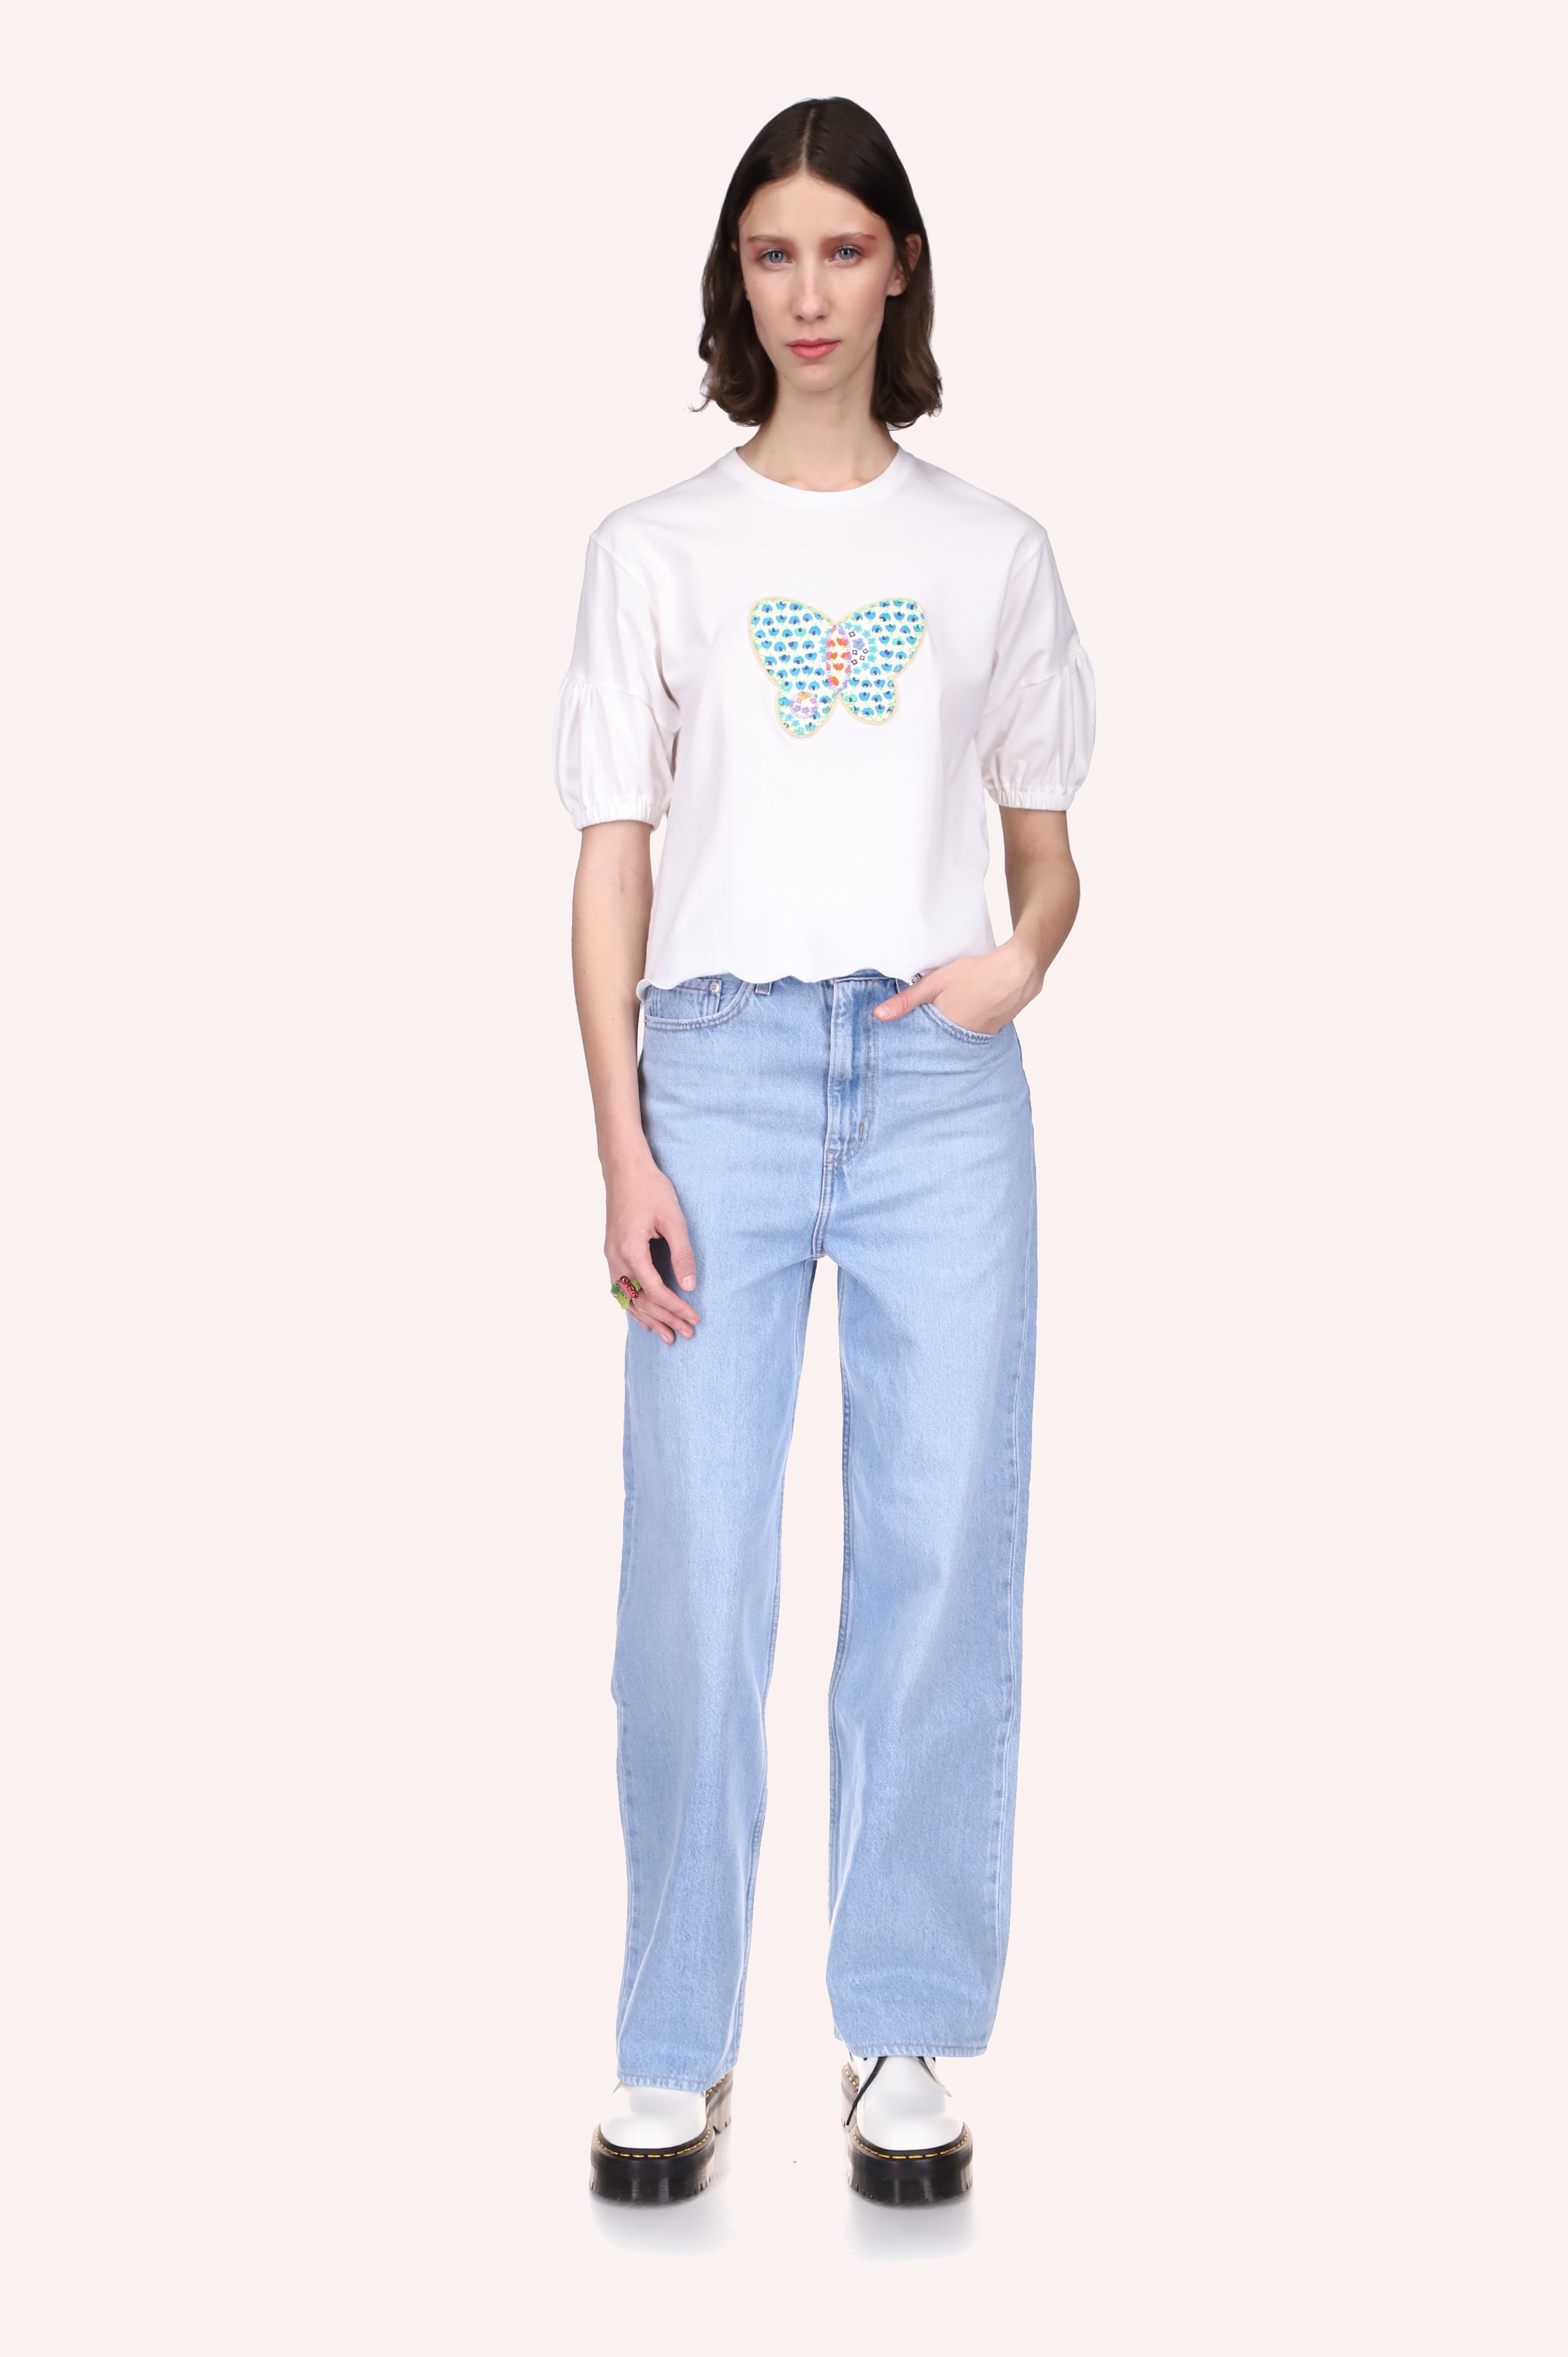 Deco Butterfly Tee white tee, short sleeves at elbow with an elastic band